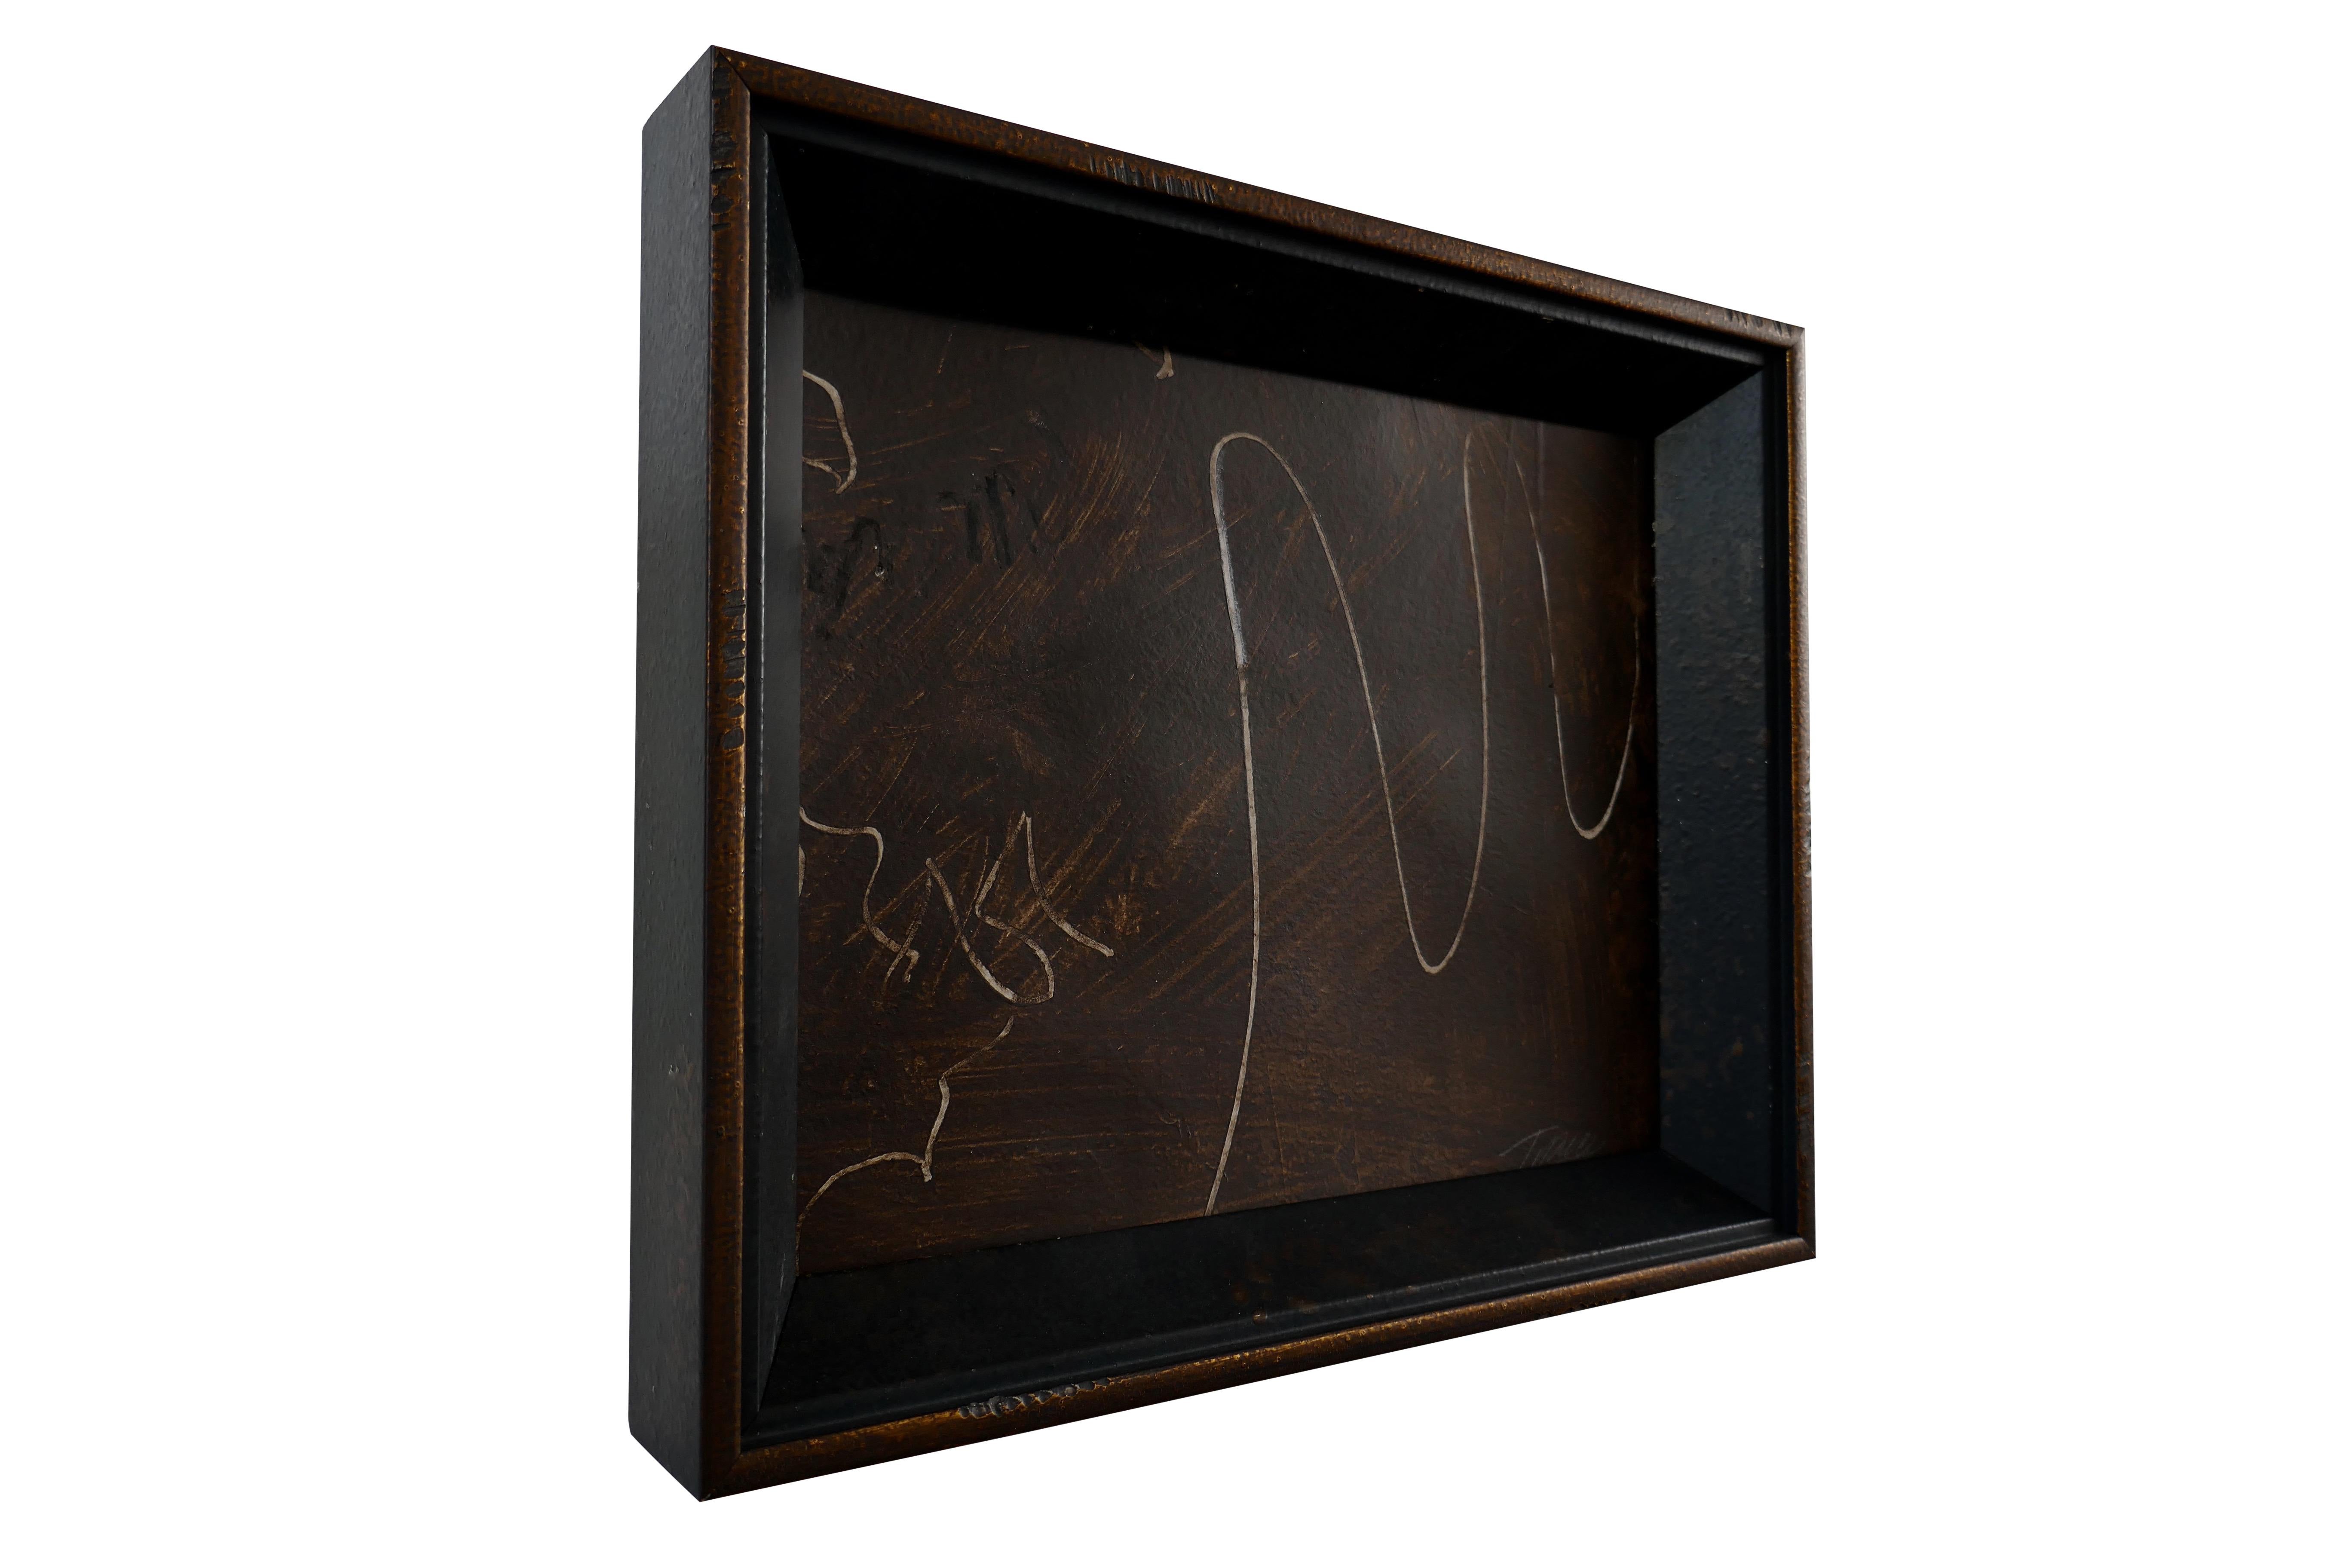 FI Gallery original one-of-one hand created & signed art piece by Tammy Price. Premium solid wood glass encased frame in matte black with gold tone accent. Multi shades predominantly of earthy terrain brown's. Mediums of acrylic, ink and charcoal.